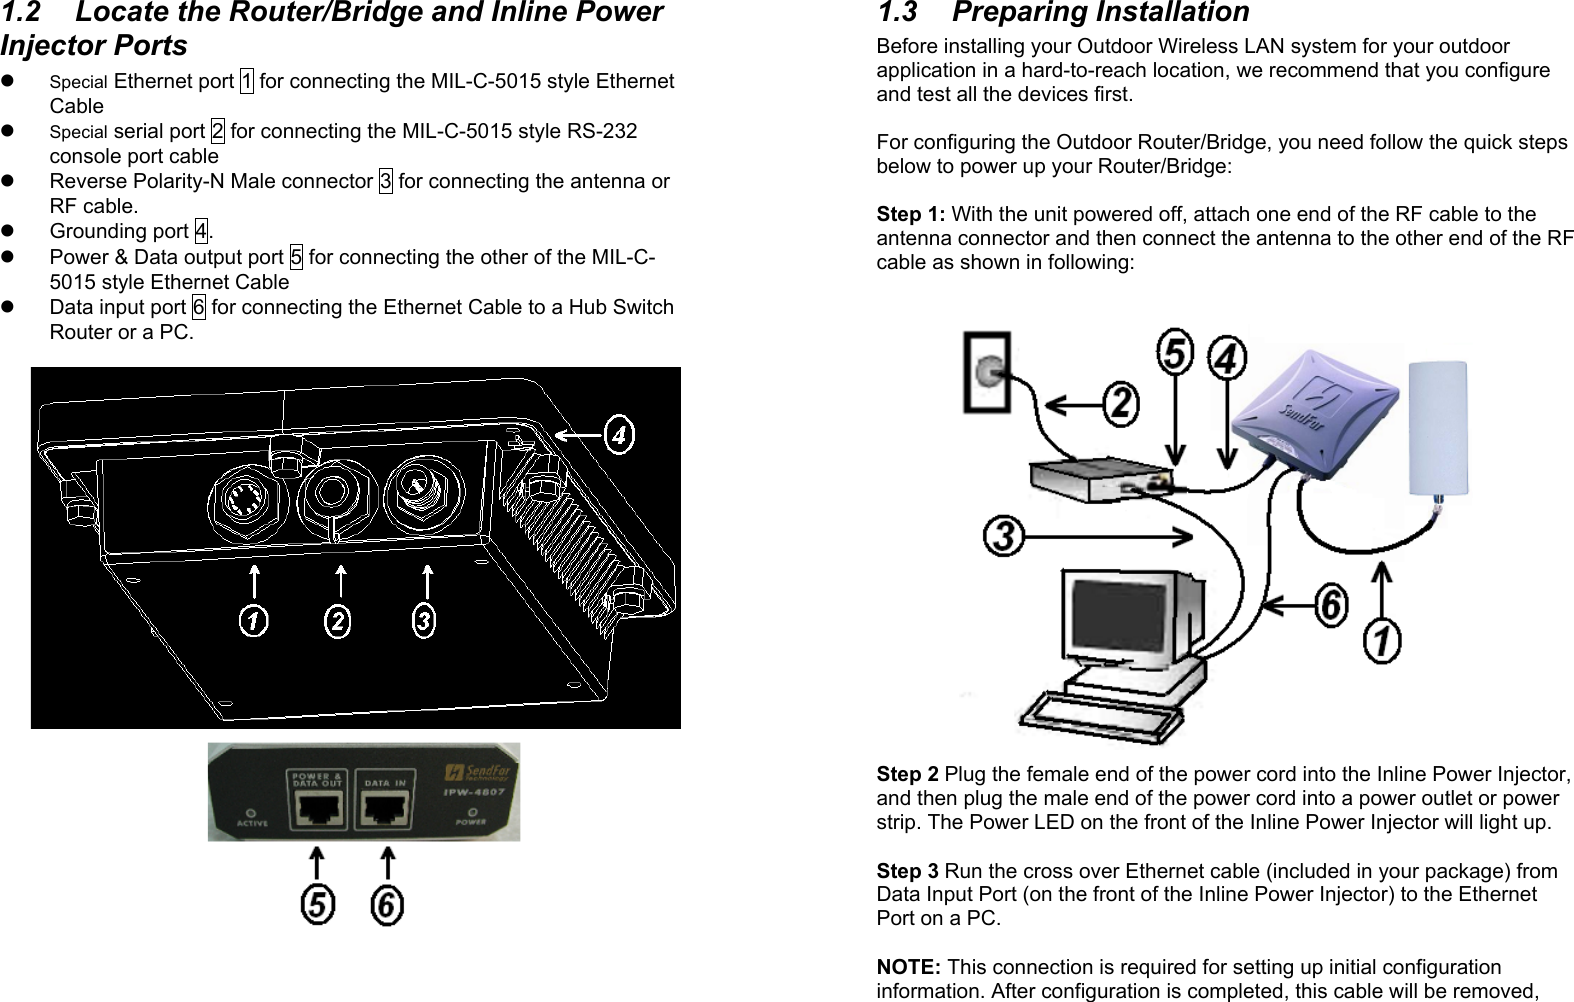 2 1.2  Locate the Router/Bridge and Inline Power Injector Ports    Special Ethernet port 1 for connecting the MIL-C-5015 style Ethernet Cable   Special serial port 2 for connecting the MIL-C-5015 style RS-232 console port cable   Reverse Polarity-N Male connector 3 for connecting the antenna or RF cable.   Grounding port 4.   Power &amp; Data output port 5 for connecting the other of the MIL-C-5015 style Ethernet Cable   Data input port 6 for connecting the Ethernet Cable to a Hub Switch Router or a PC.                            3 1.3 Preparing Installation Before installing your Outdoor Wireless LAN system for your outdoor application in a hard-to-reach location, we recommend that you configure and test all the devices first.  For configuring the Outdoor Router/Bridge, you need follow the quick steps below to power up your Router/Bridge:   Step 1: With the unit powered off, attach one end of the RF cable to the antenna connector and then connect the antenna to the other end of the RF cable as shown in following:                      Step 2 Plug the female end of the power cord into the Inline Power Injector, and then plug the male end of the power cord into a power outlet or power strip. The Power LED on the front of the Inline Power Injector will light up.  Step 3 Run the cross over Ethernet cable (included in your package) from Data Input Port (on the front of the Inline Power Injector) to the Ethernet Port on a PC.  NOTE: This connection is required for setting up initial configuration information. After configuration is completed, this cable will be removed, 